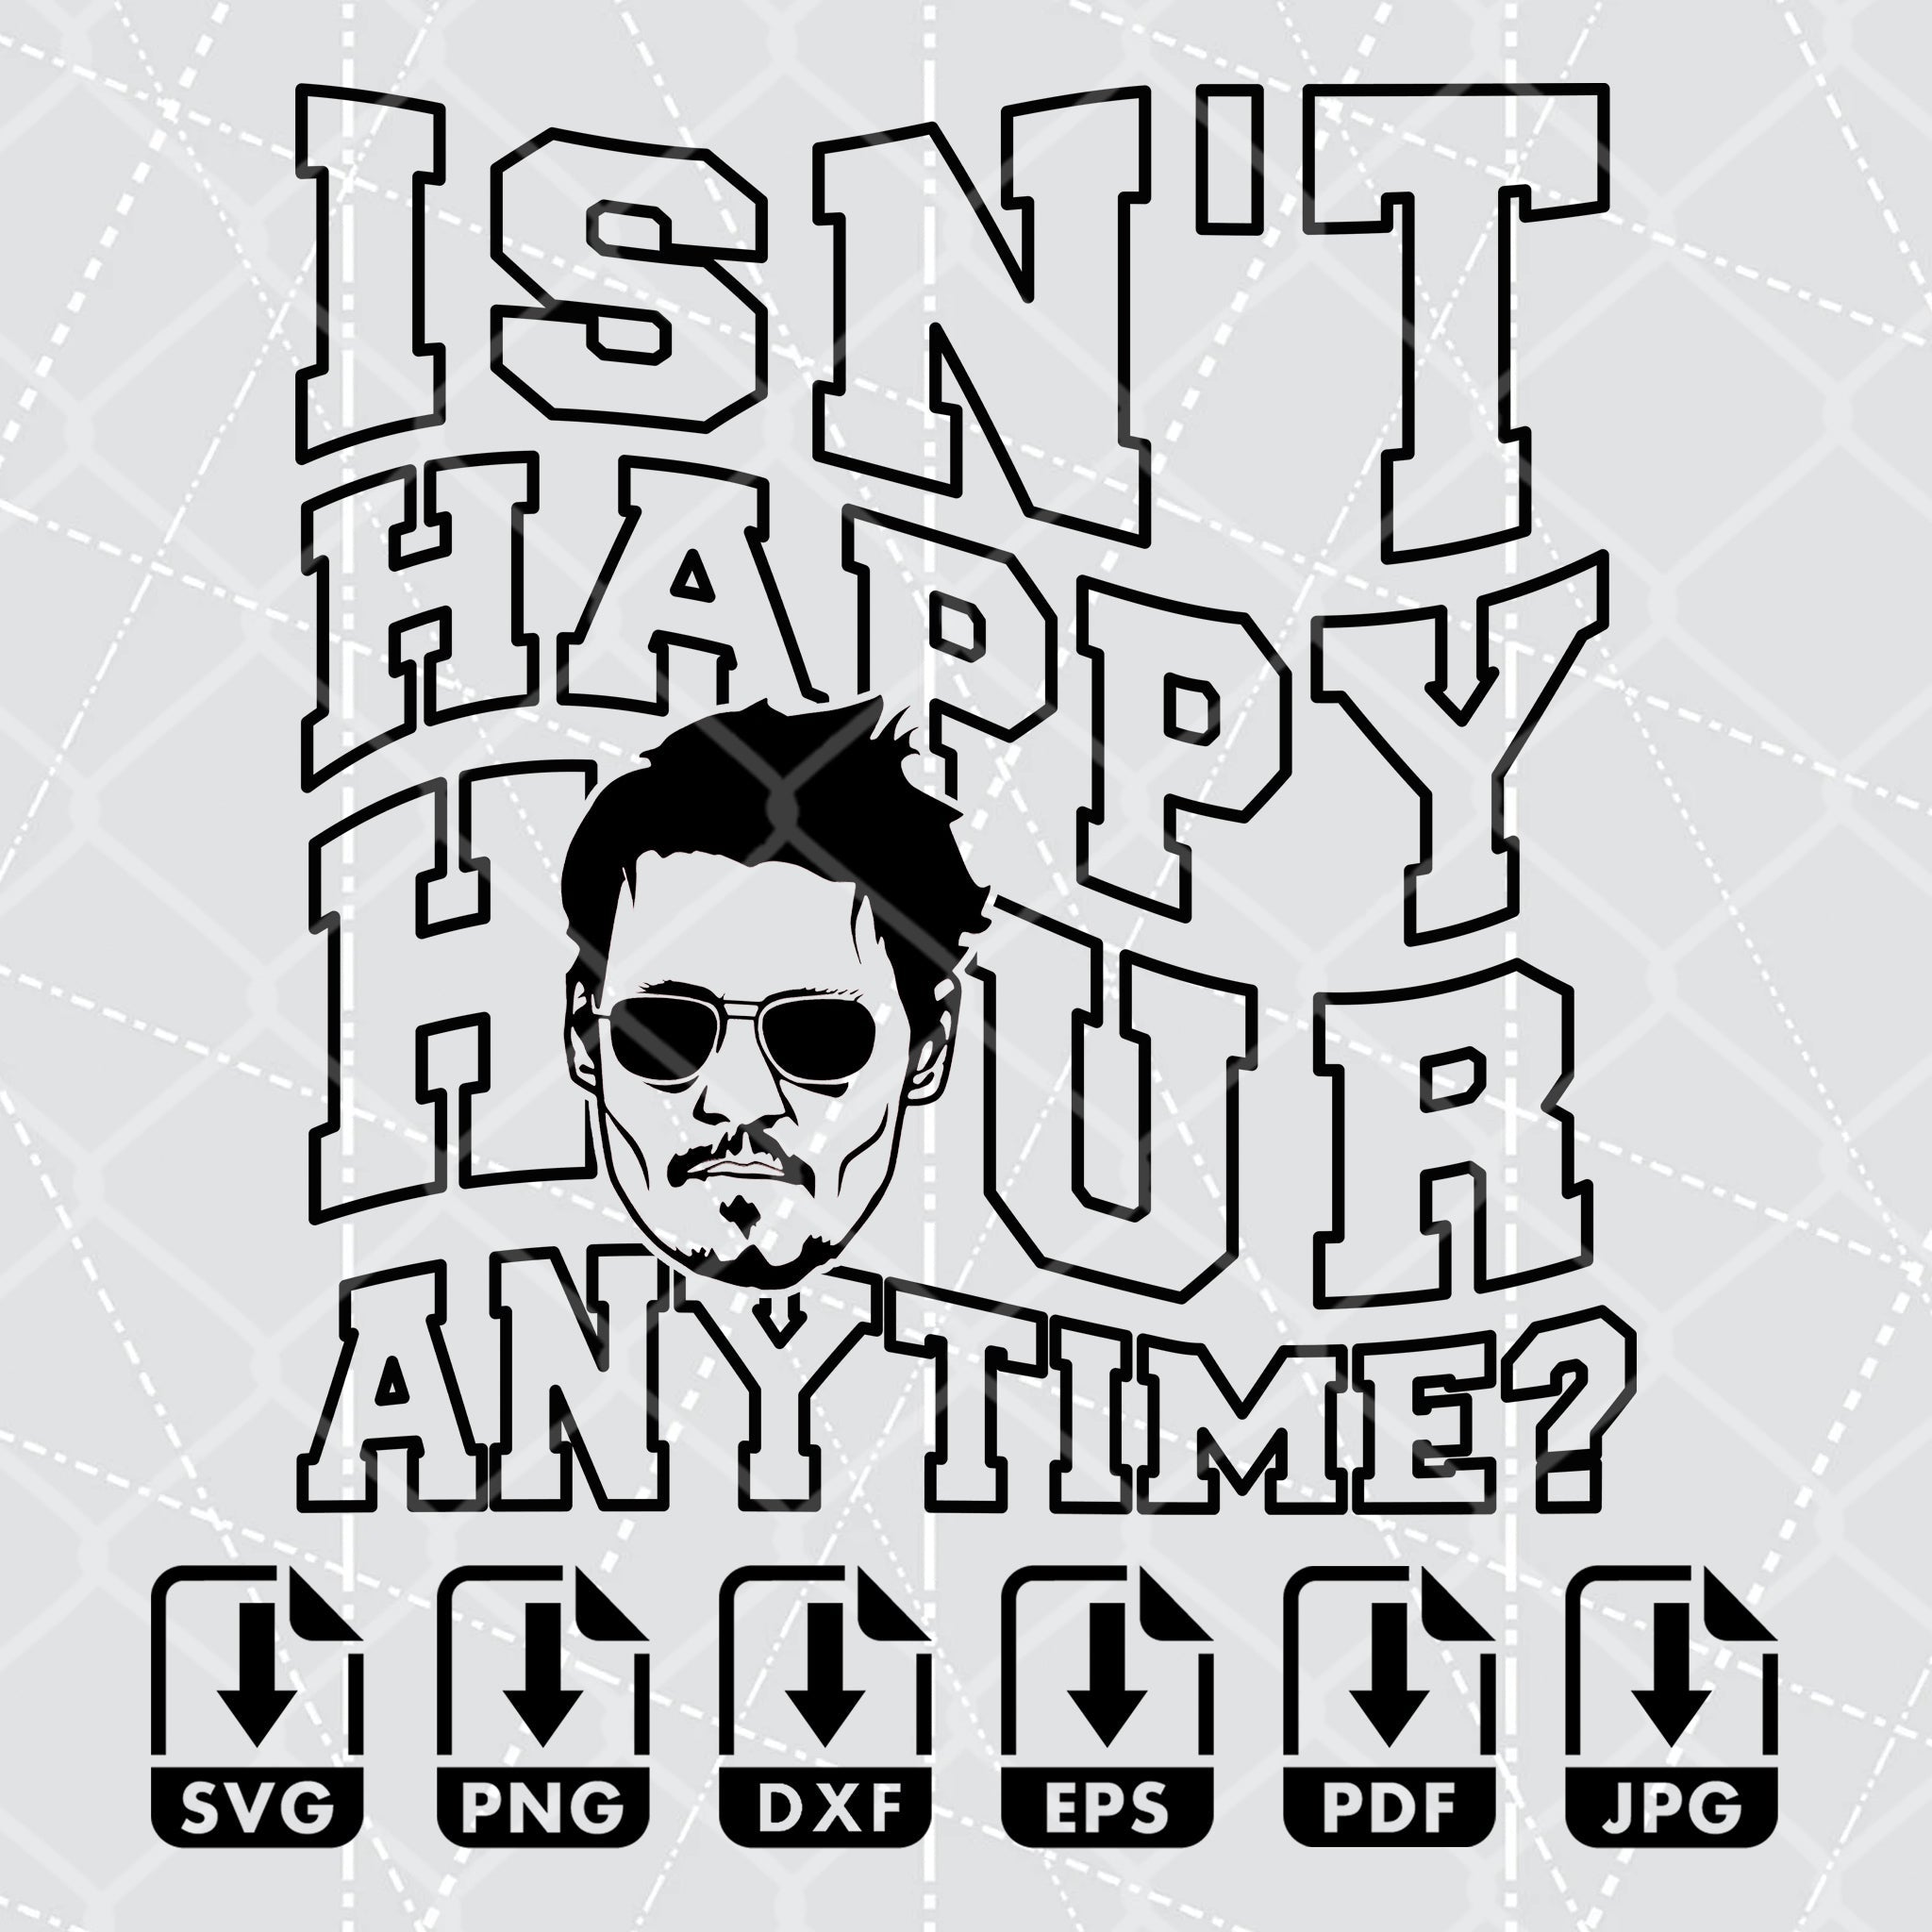 Isn't Happy Hour Anytime?